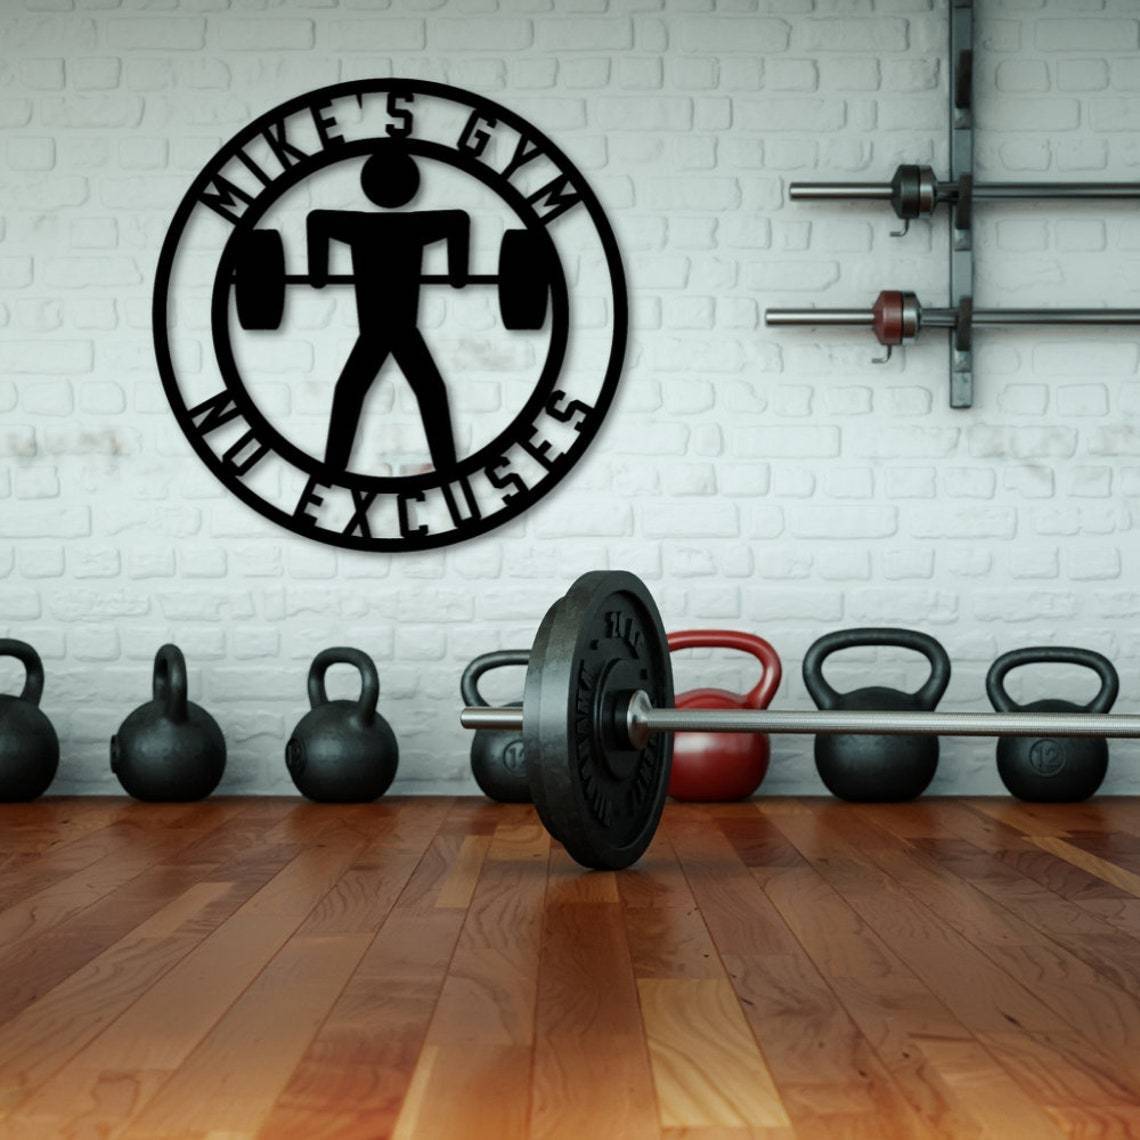  Custom Gym Dumbbell Metal Signs,Personalized Home Gym